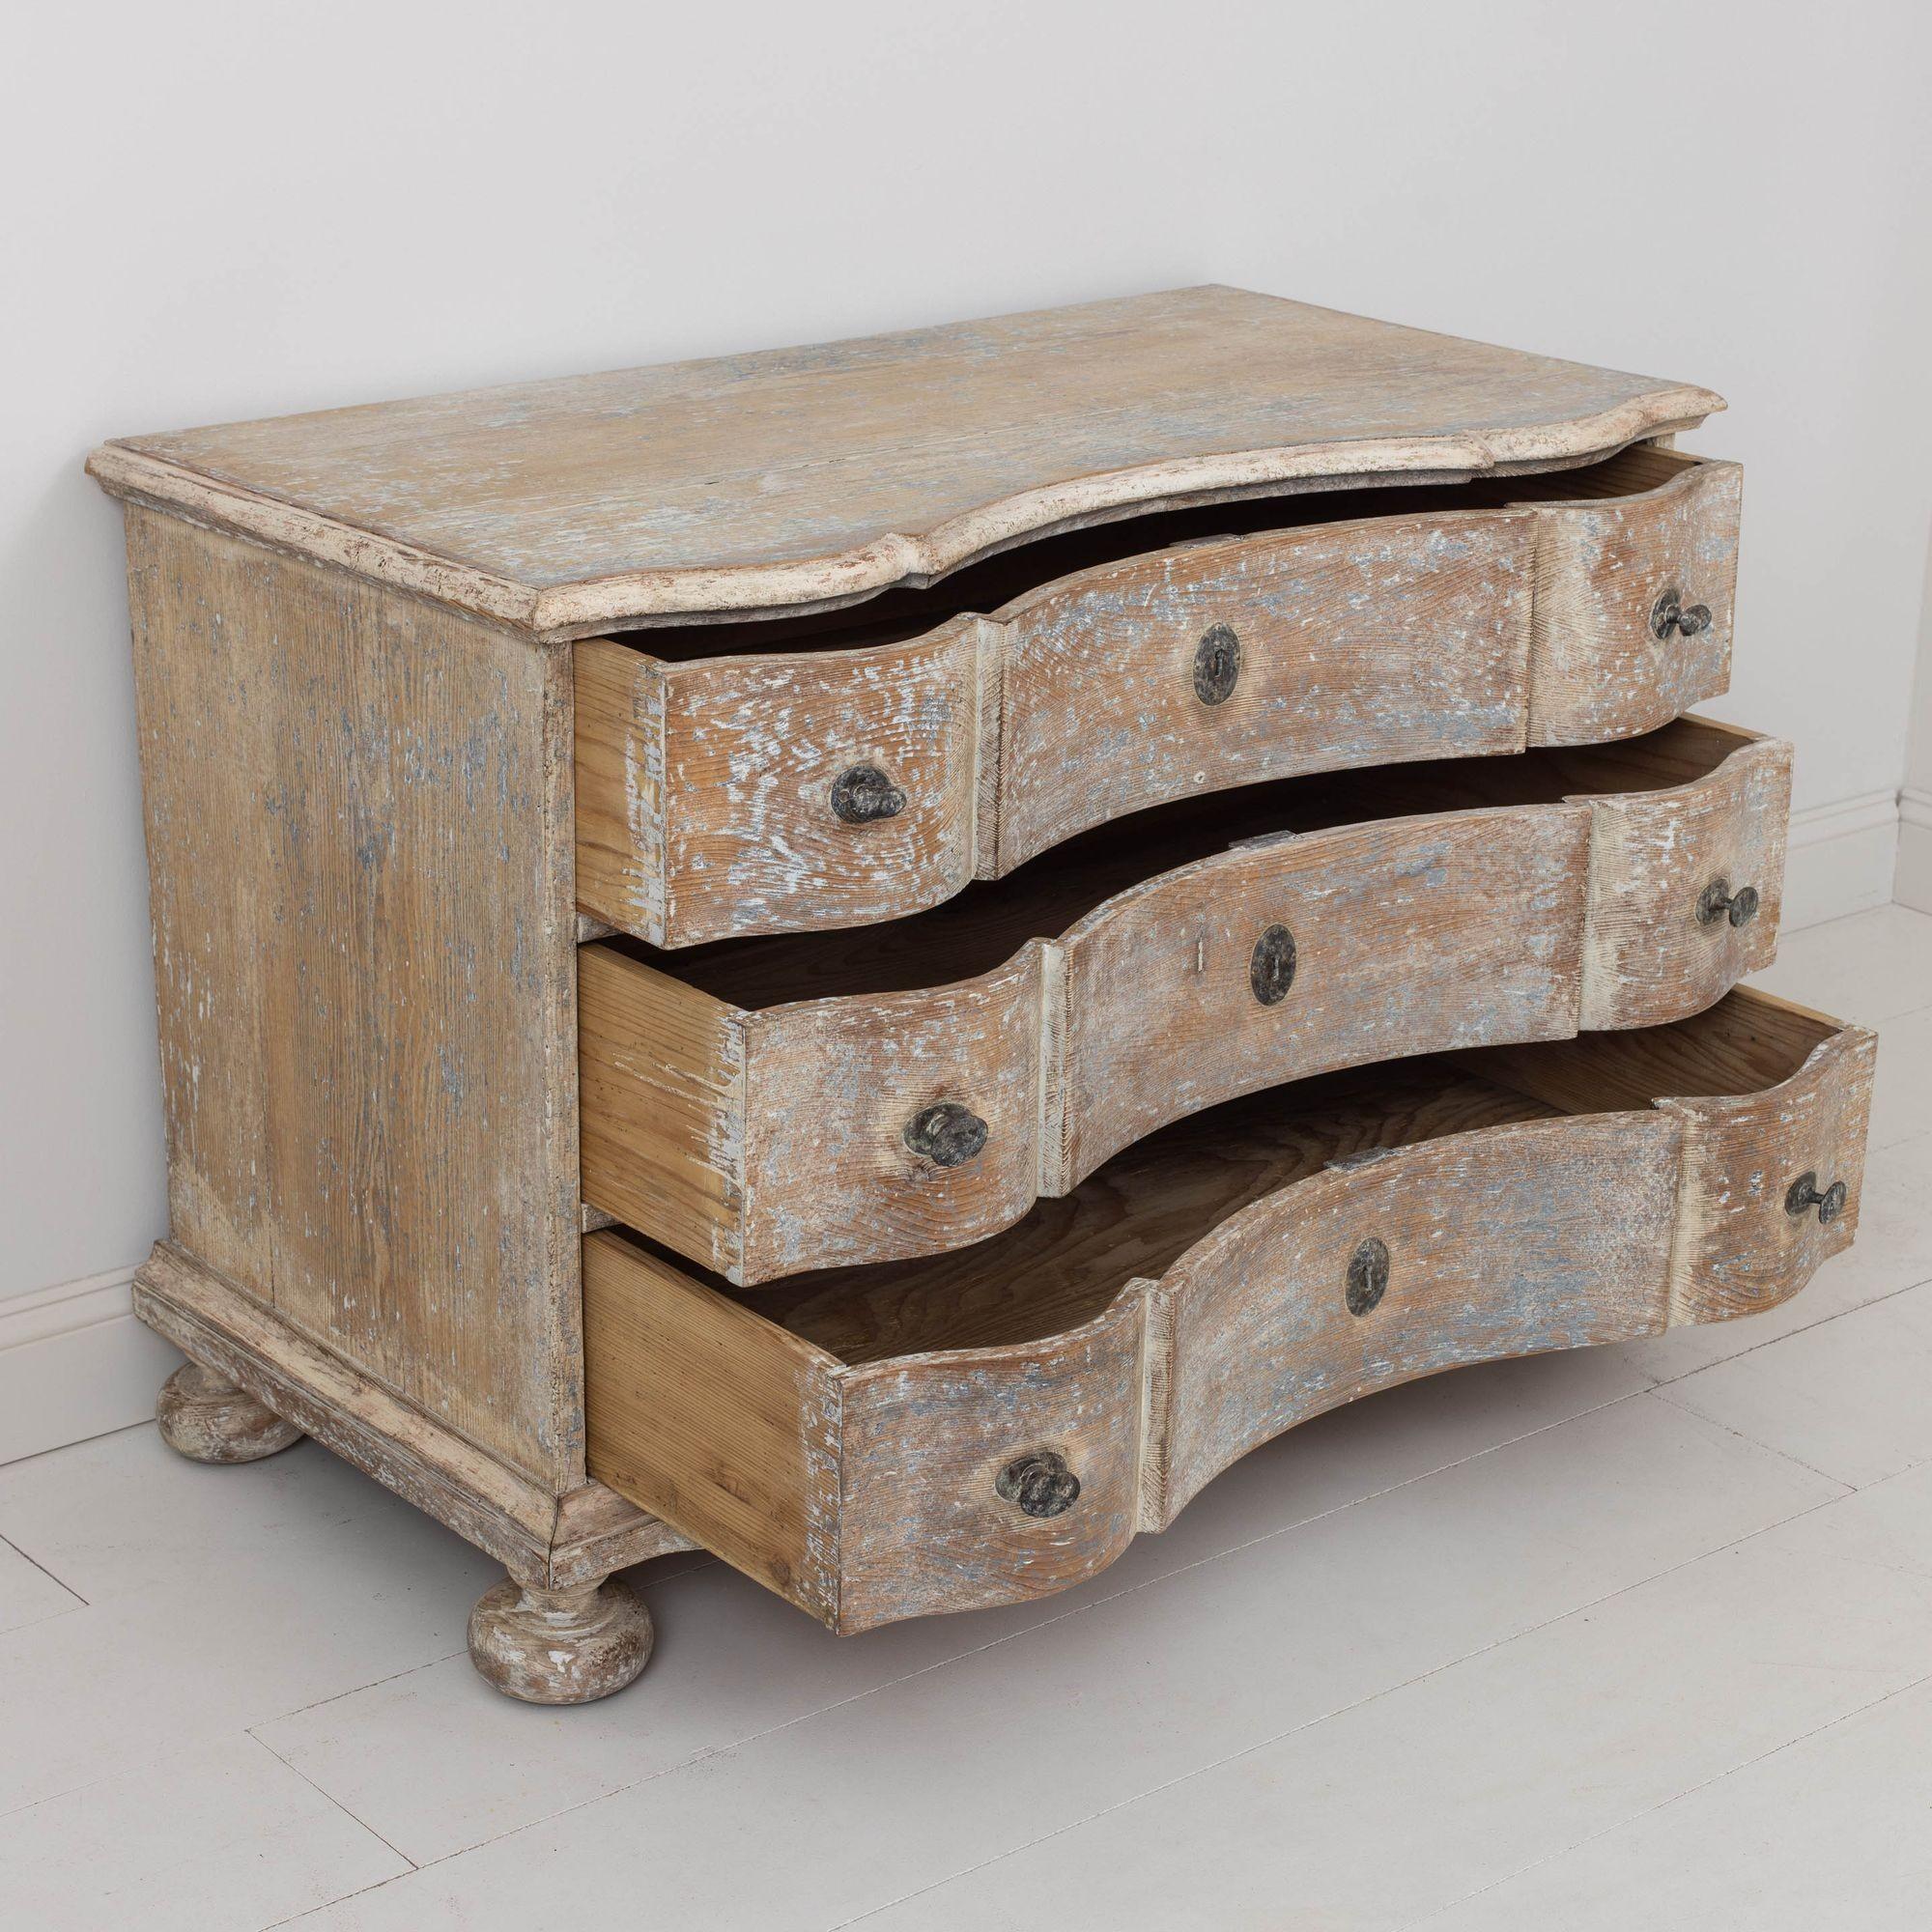 18th c. German Baroque Commode in Original Patina with Arbalette Shaped Front For Sale 12